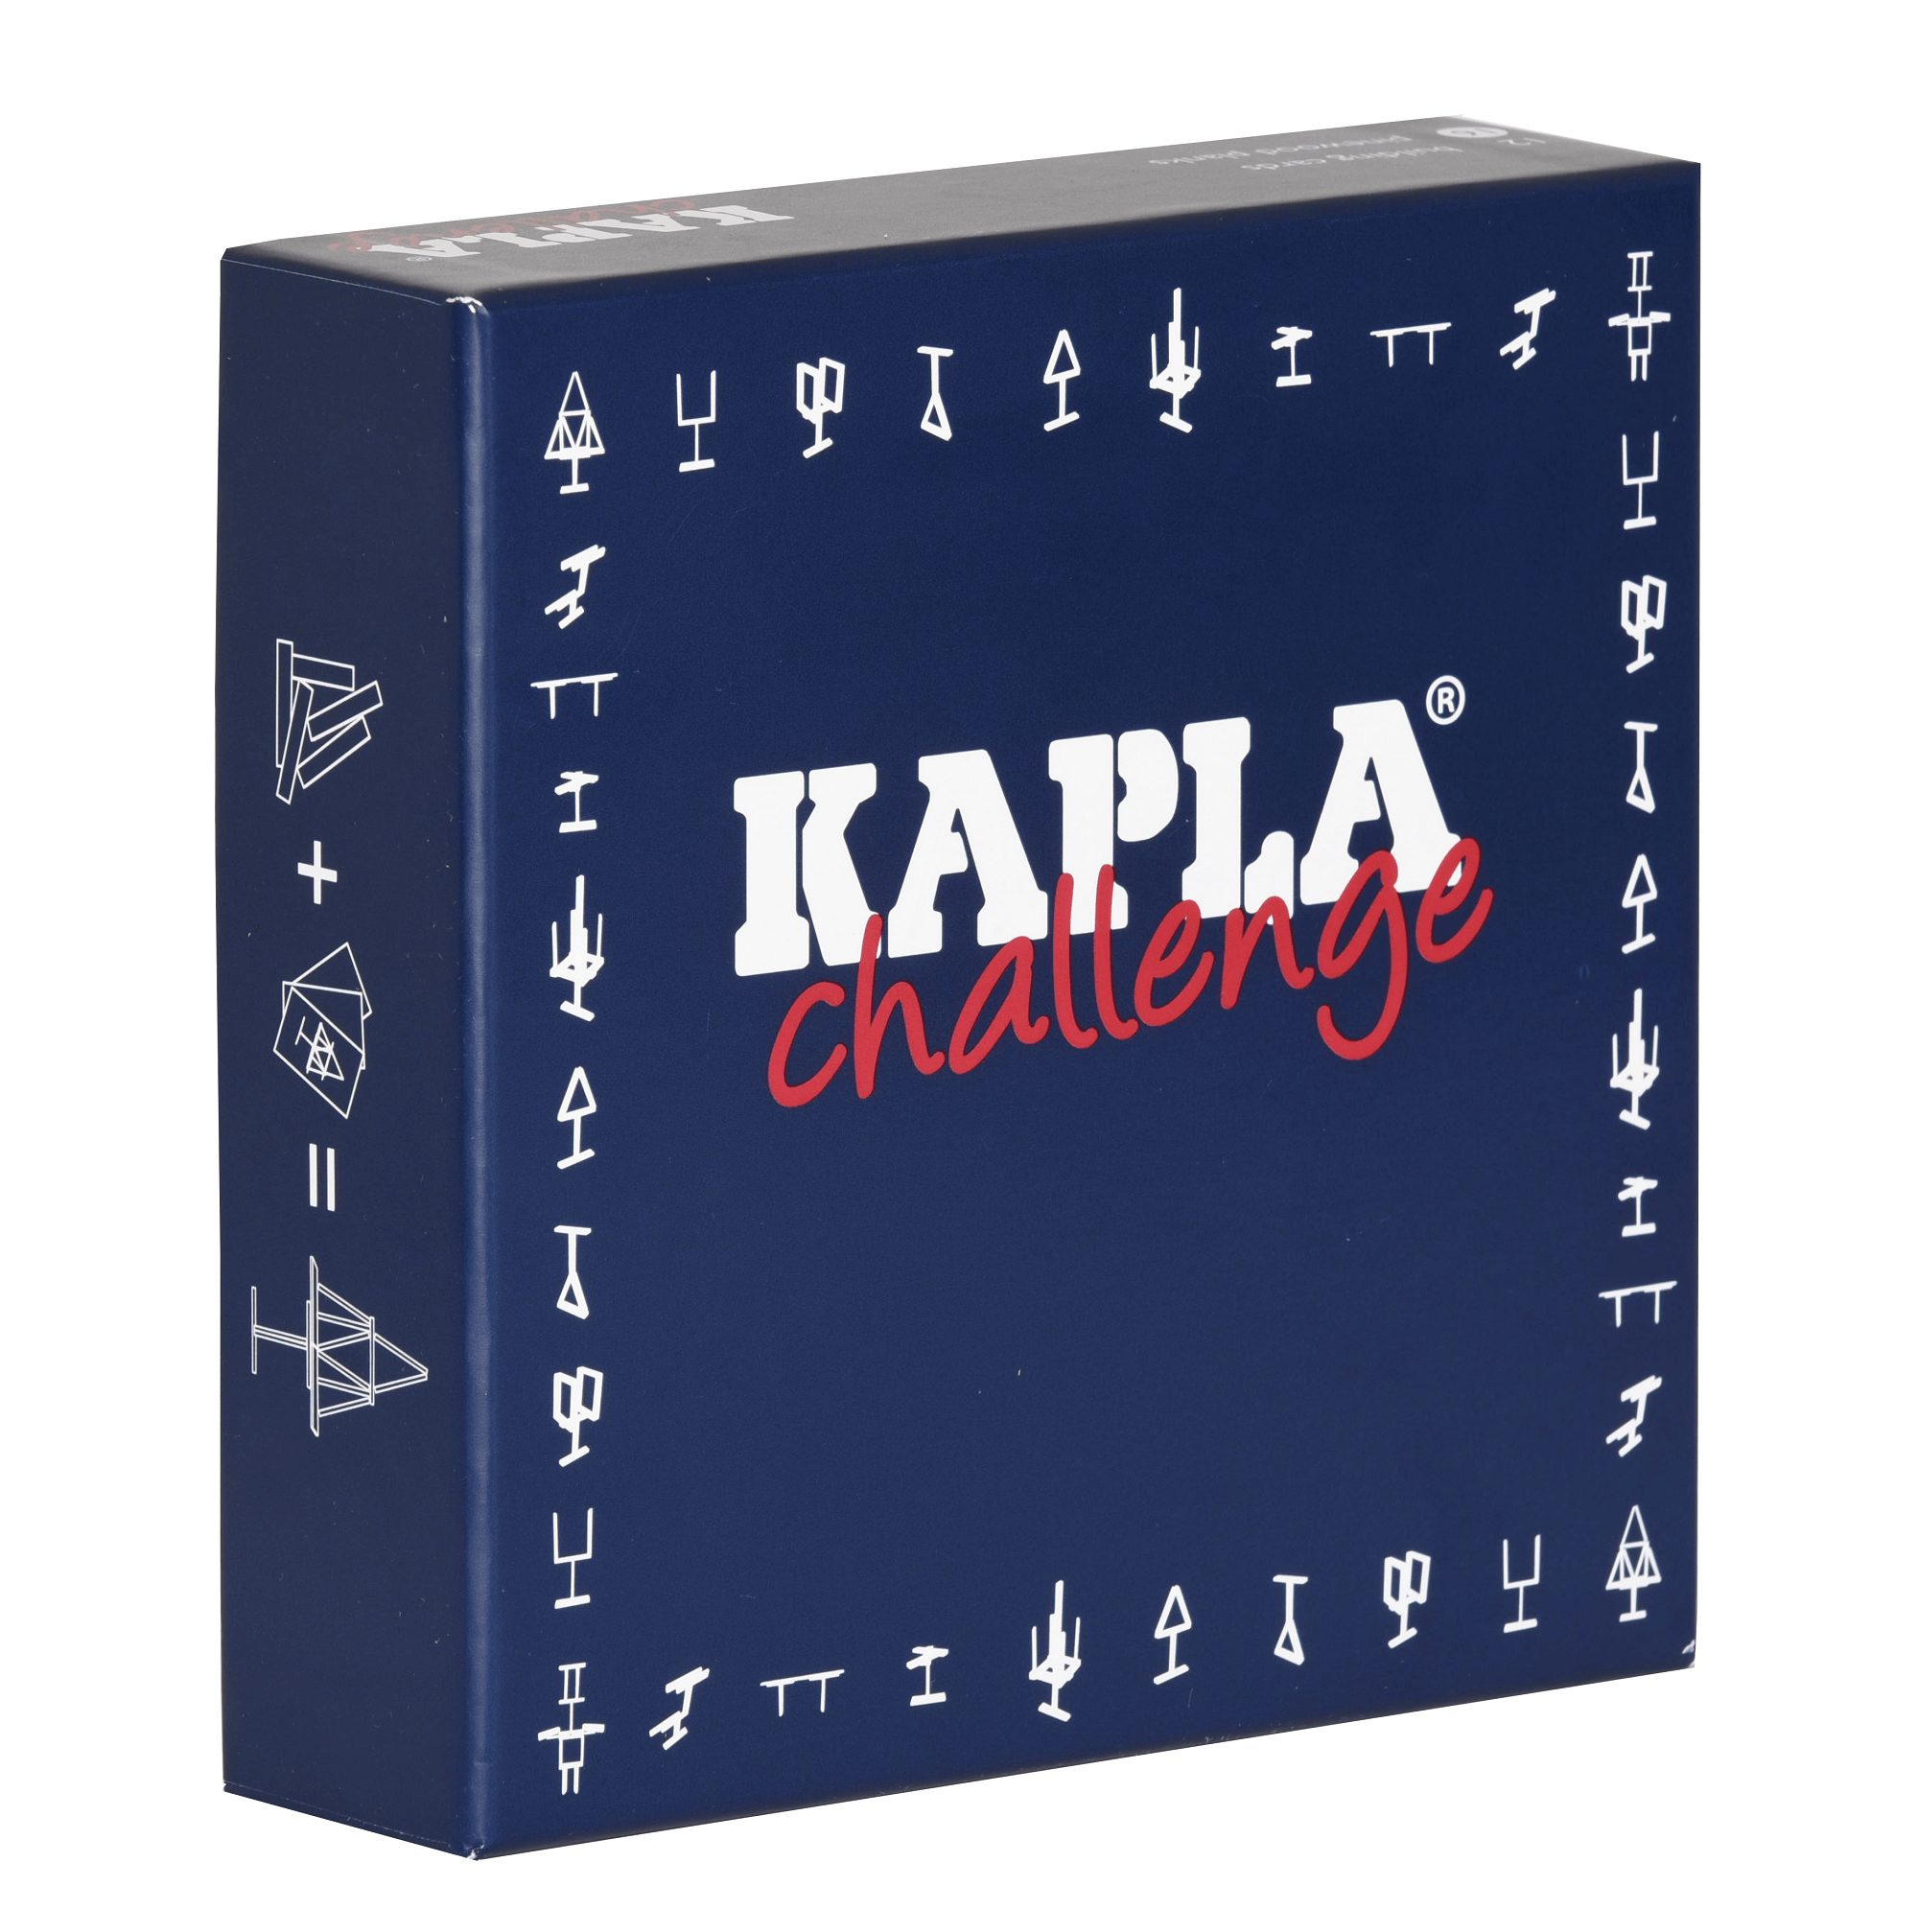 Box and challenge cards of Kapla game.